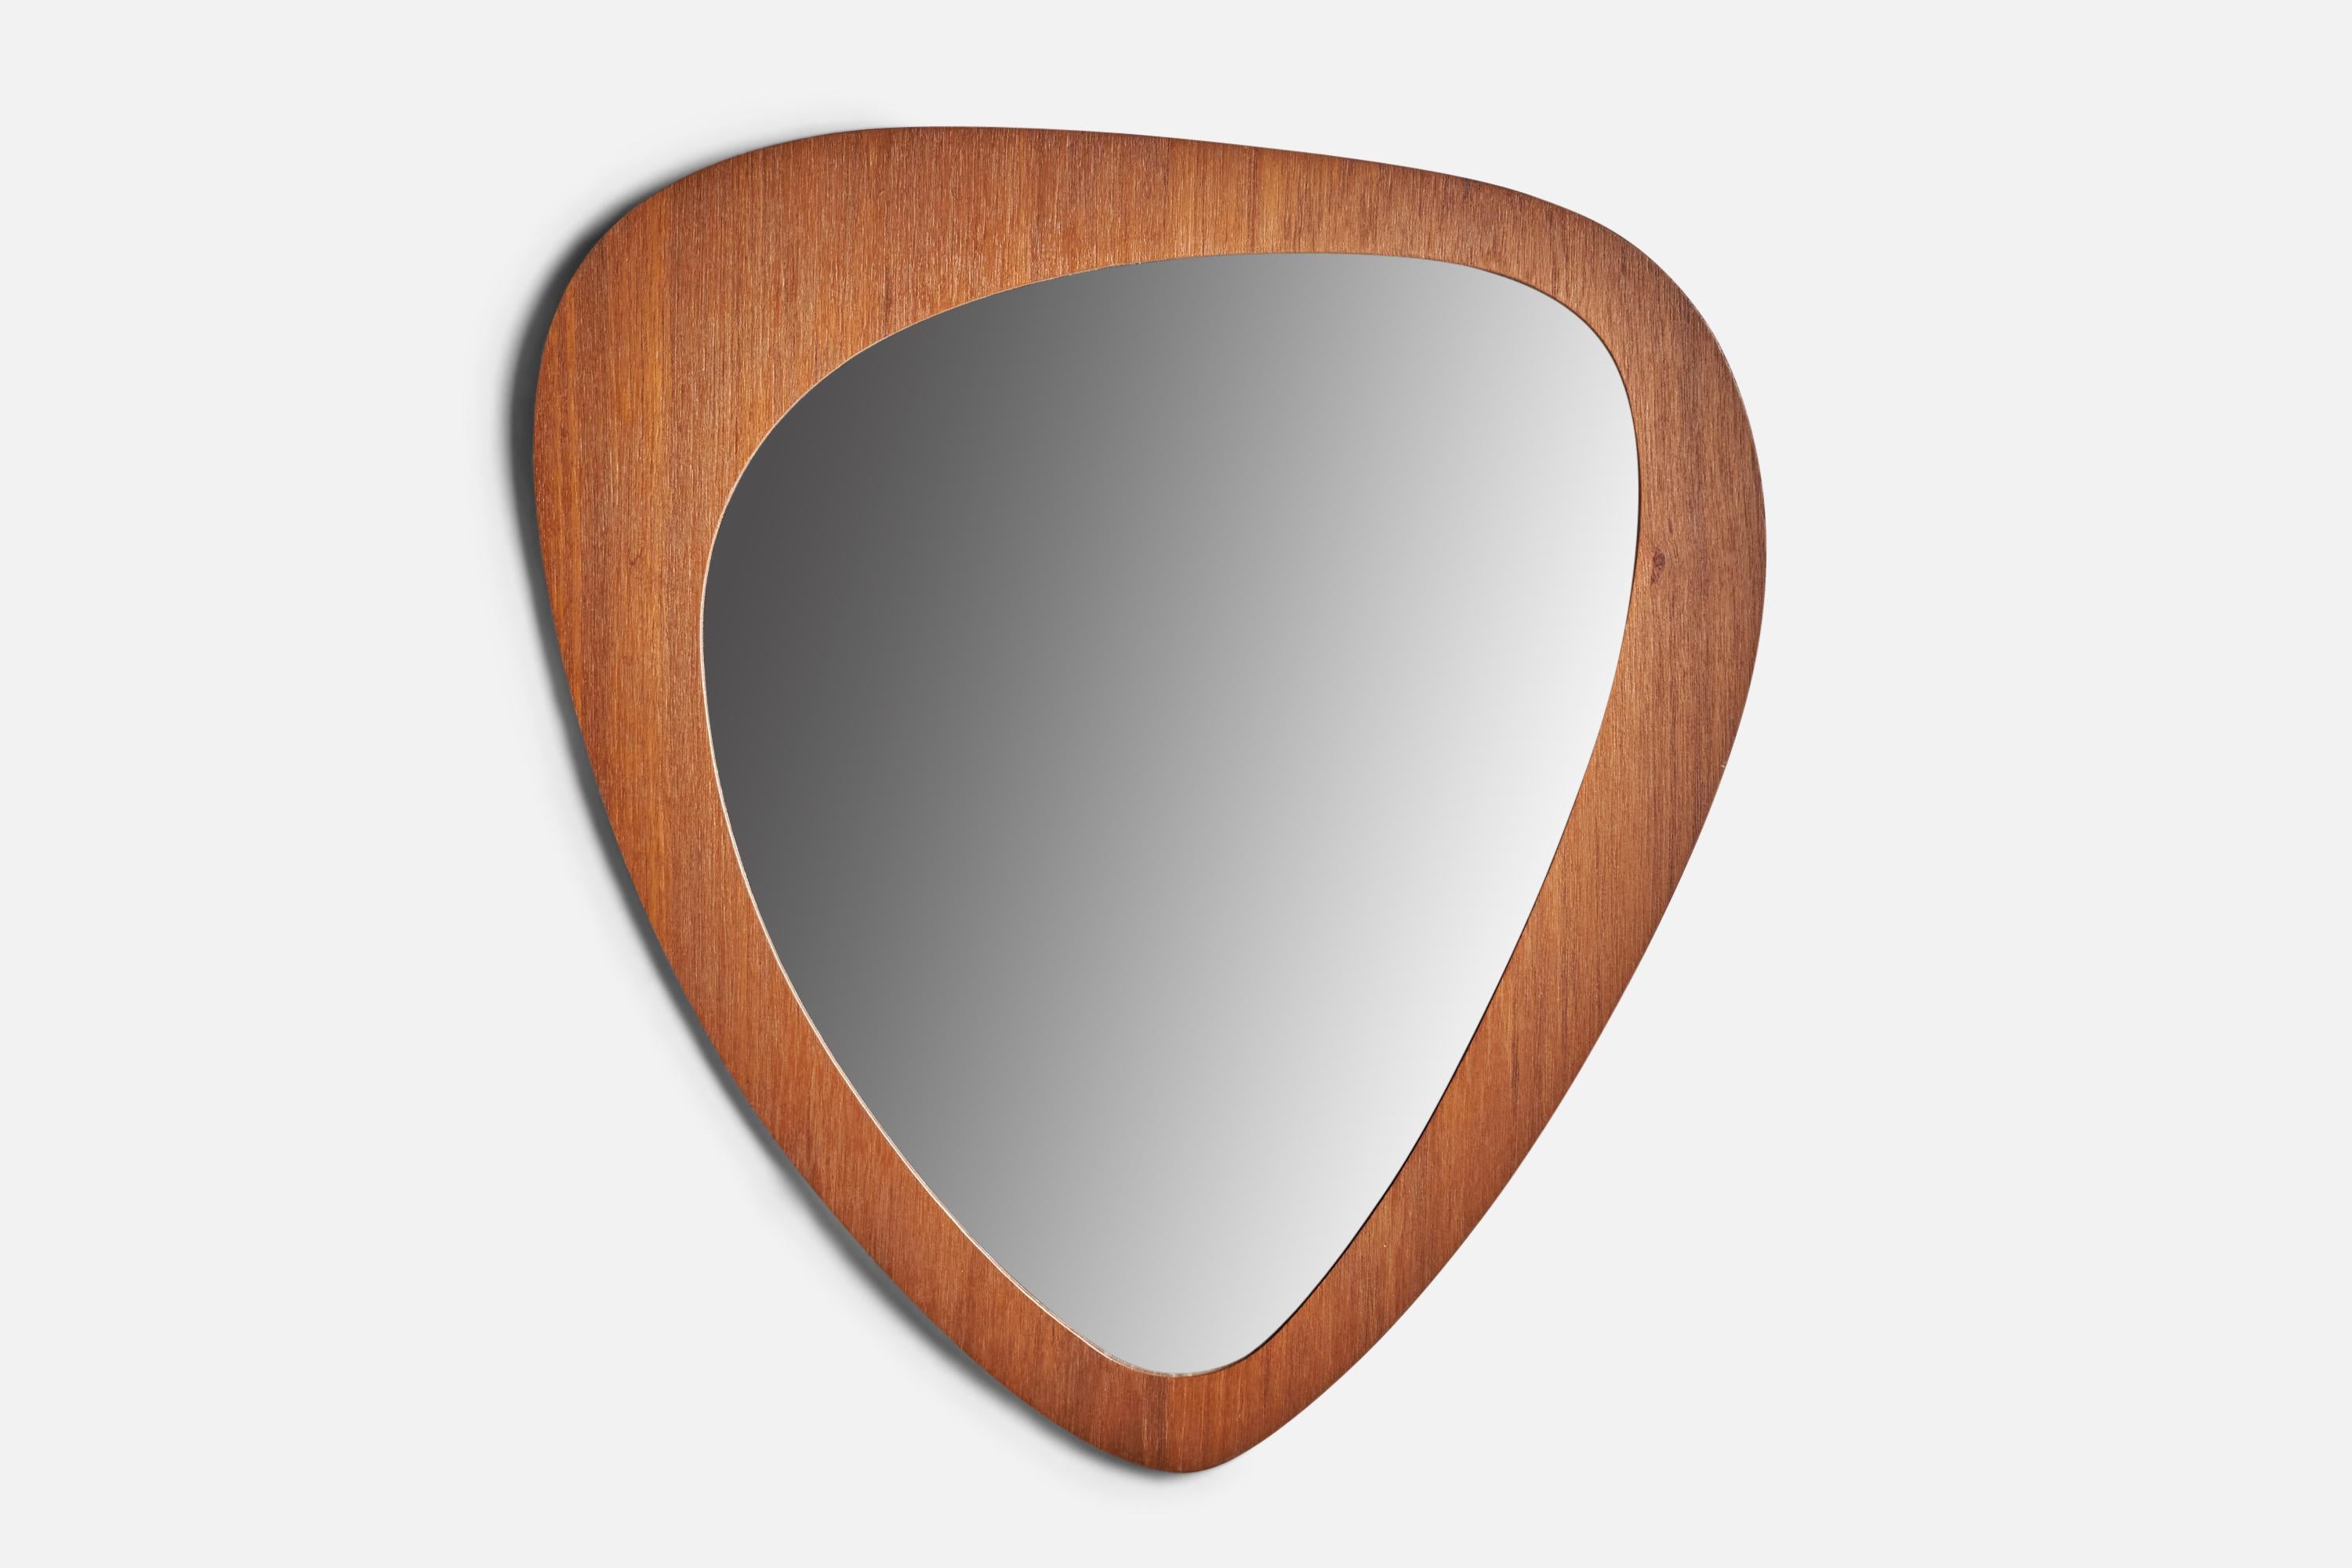 A thin teak-veneered freeform wall mirror designed and produced in Sweden, 1950s.